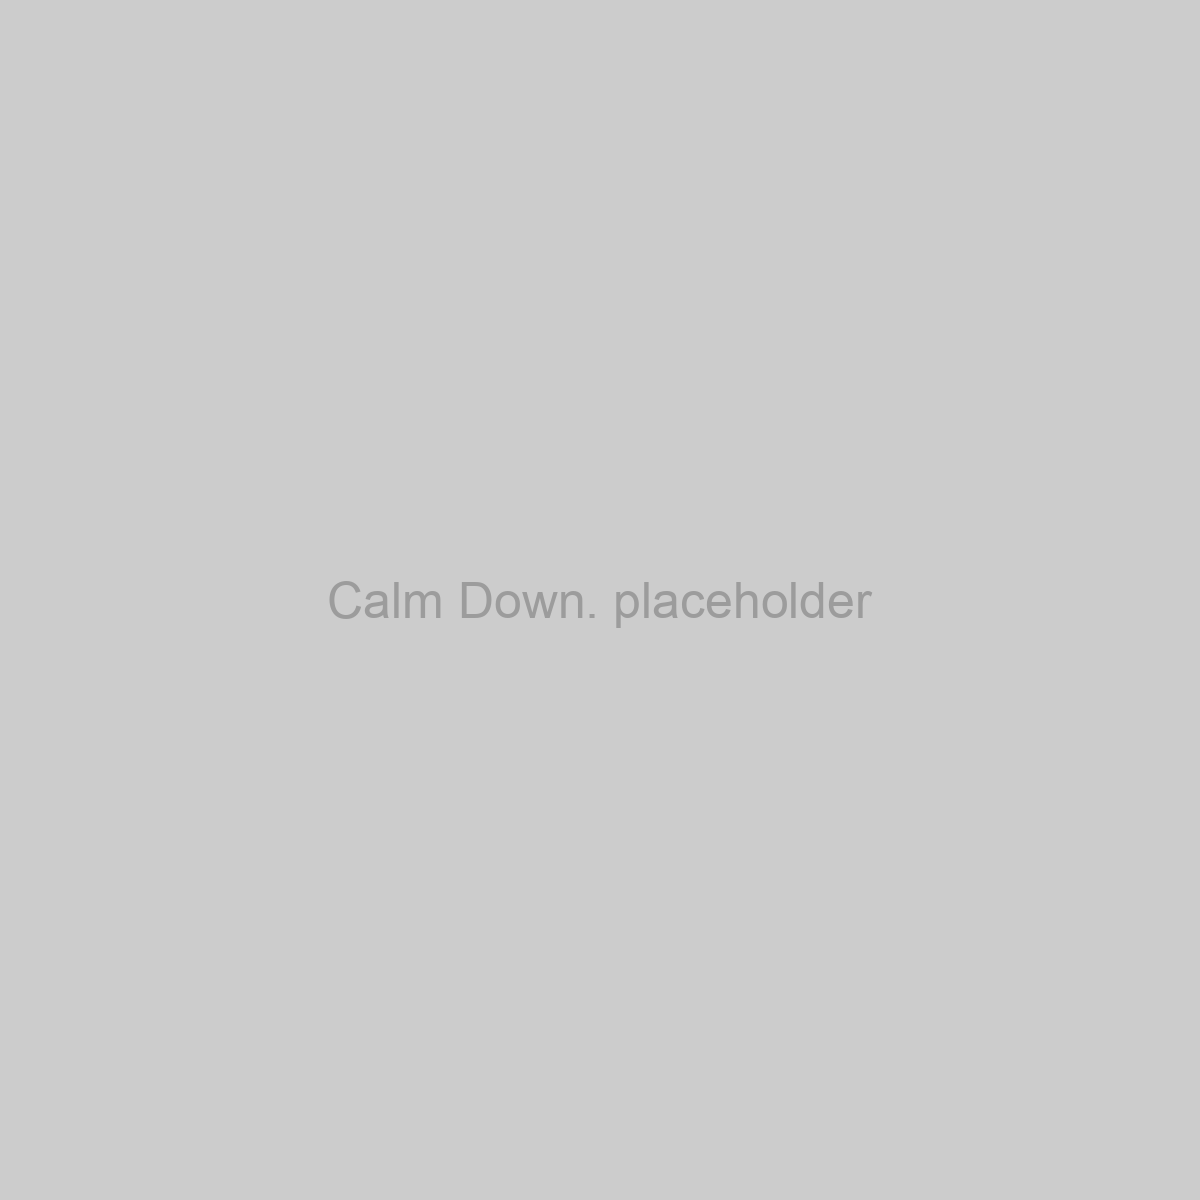 Calm Down. Placeholder Image